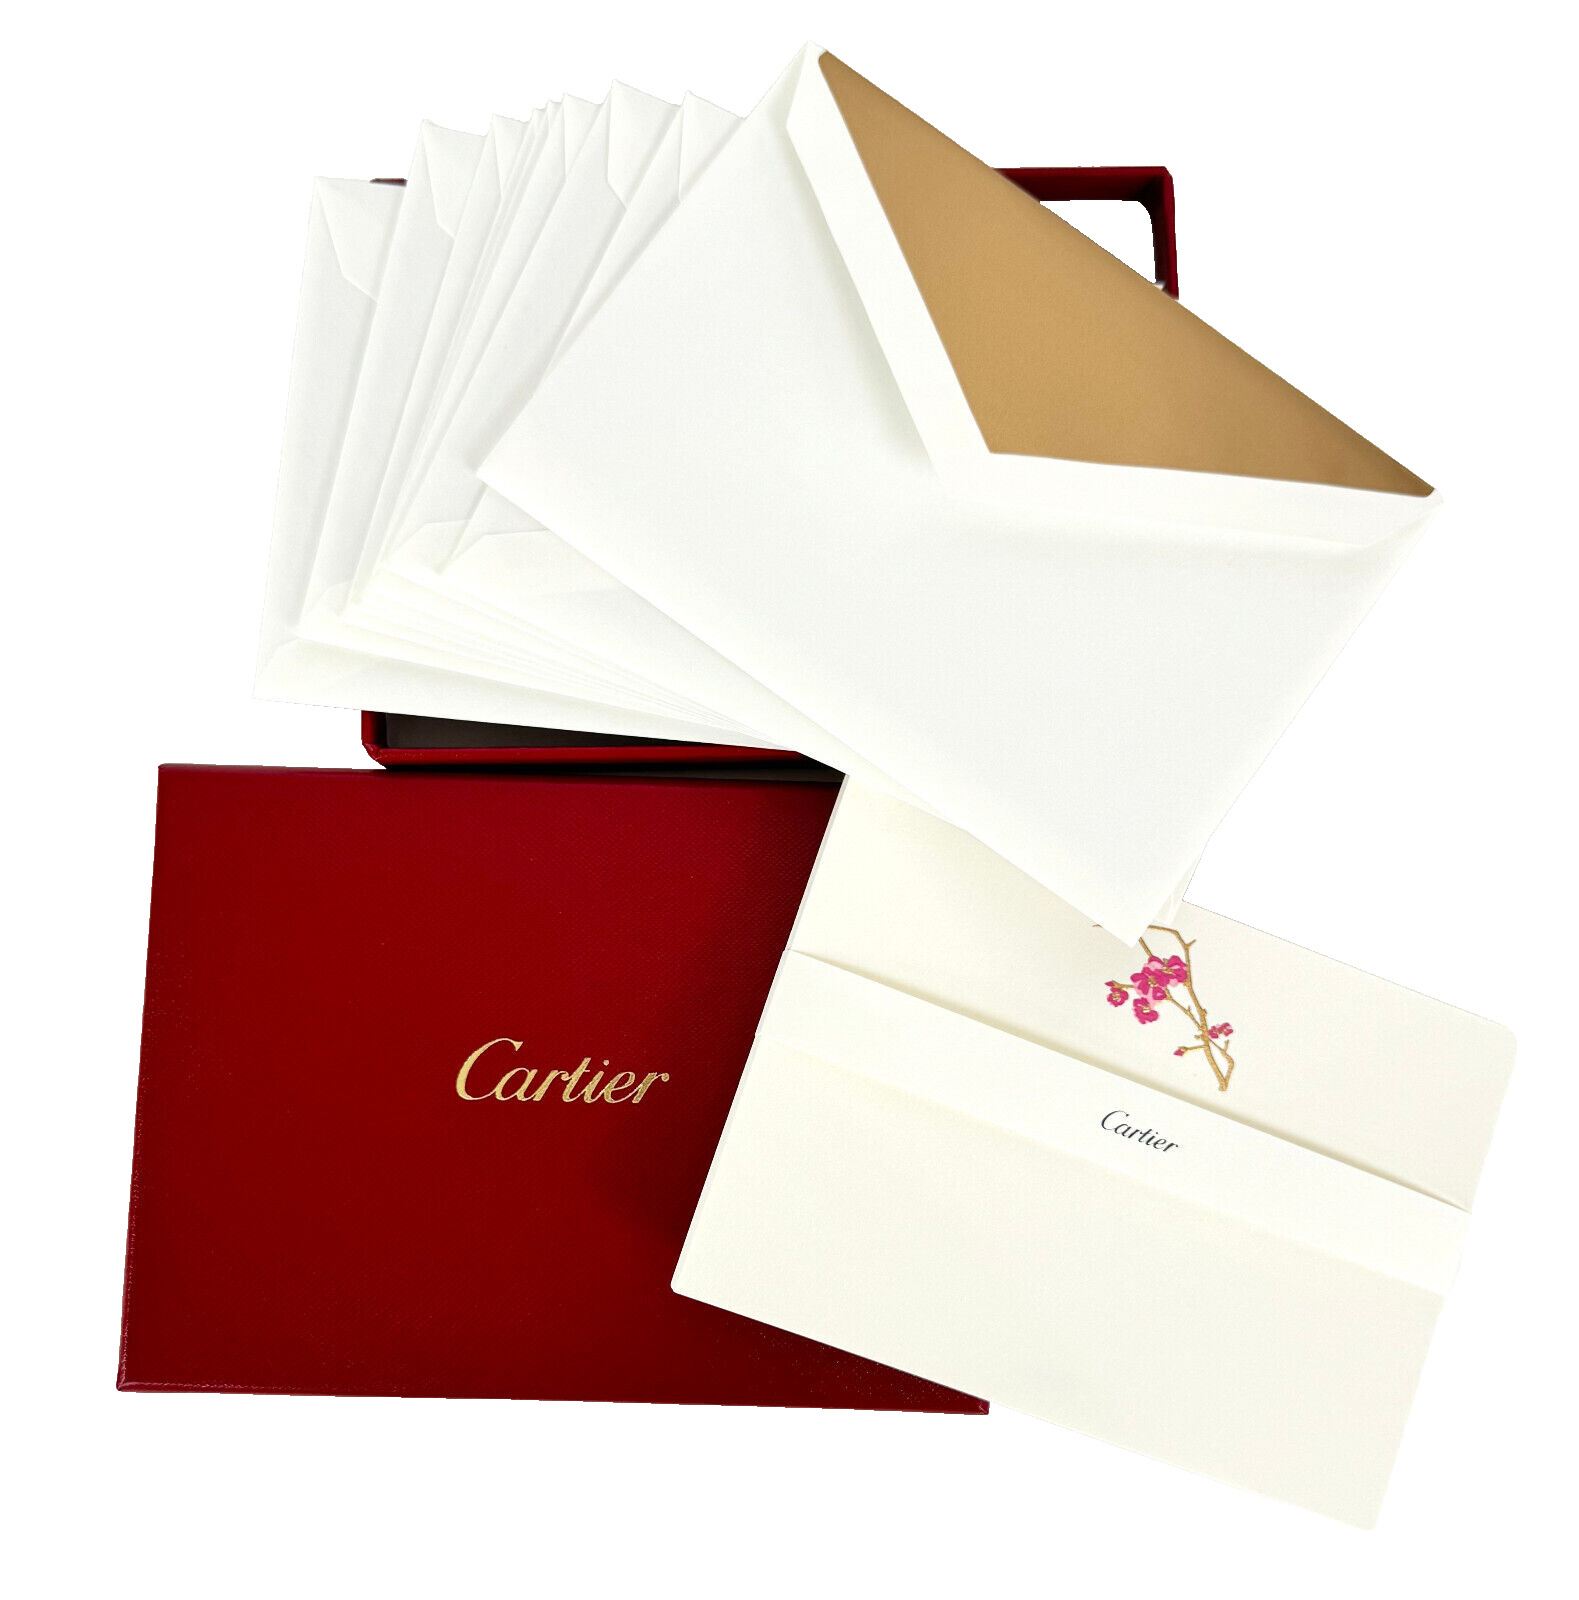 Cartier NIB Auth 10 Note Cards with 10 Envelopes Set Box w Red Gift Bag Ribbon